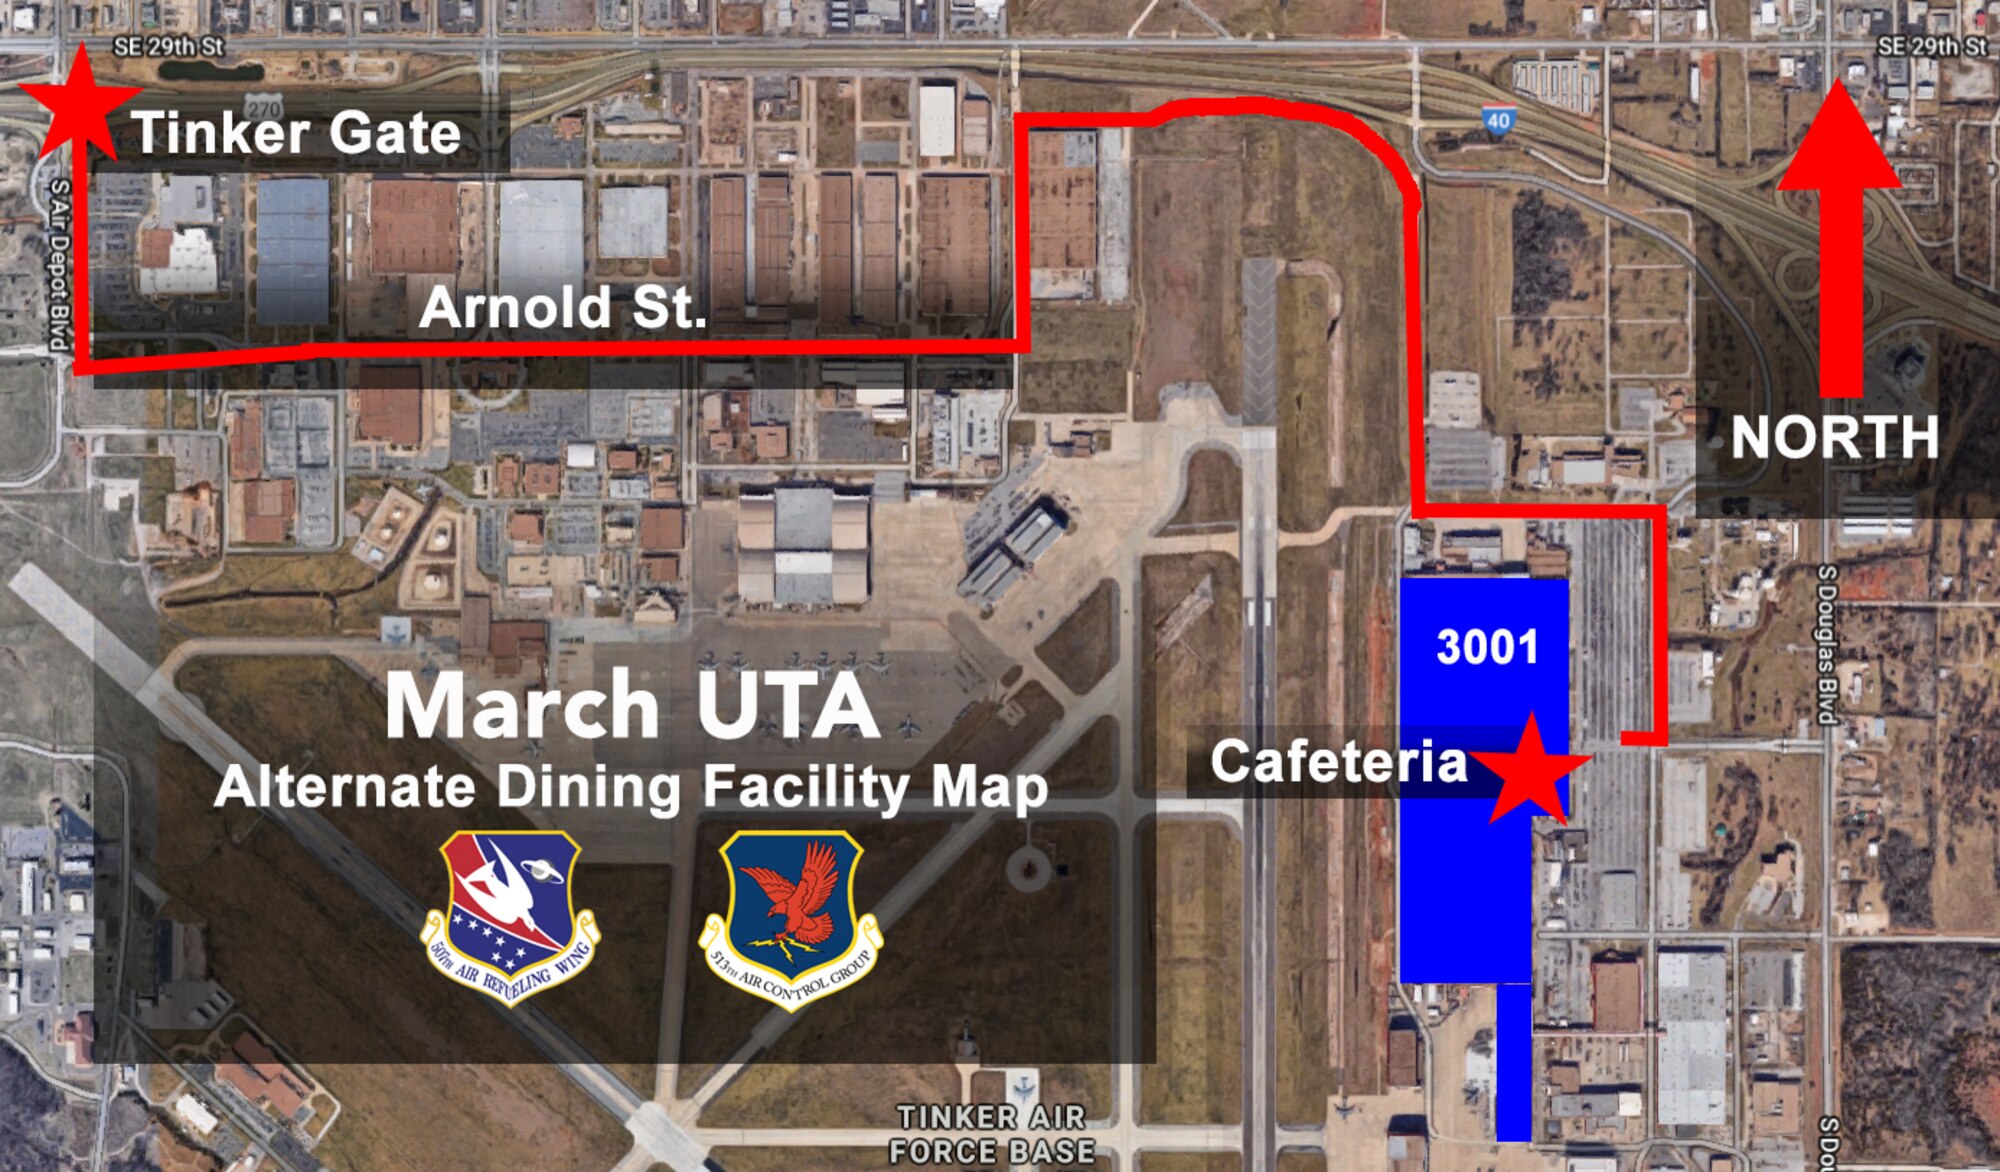 During the March Unit Training Assembly March 2-3, 2019, Reservists at Tinker Air Force Base, Oklahoma, will receive their meals at the Bldg. 3001 Cafeteria. (U.S. Air Force image by Lauren Gleason)